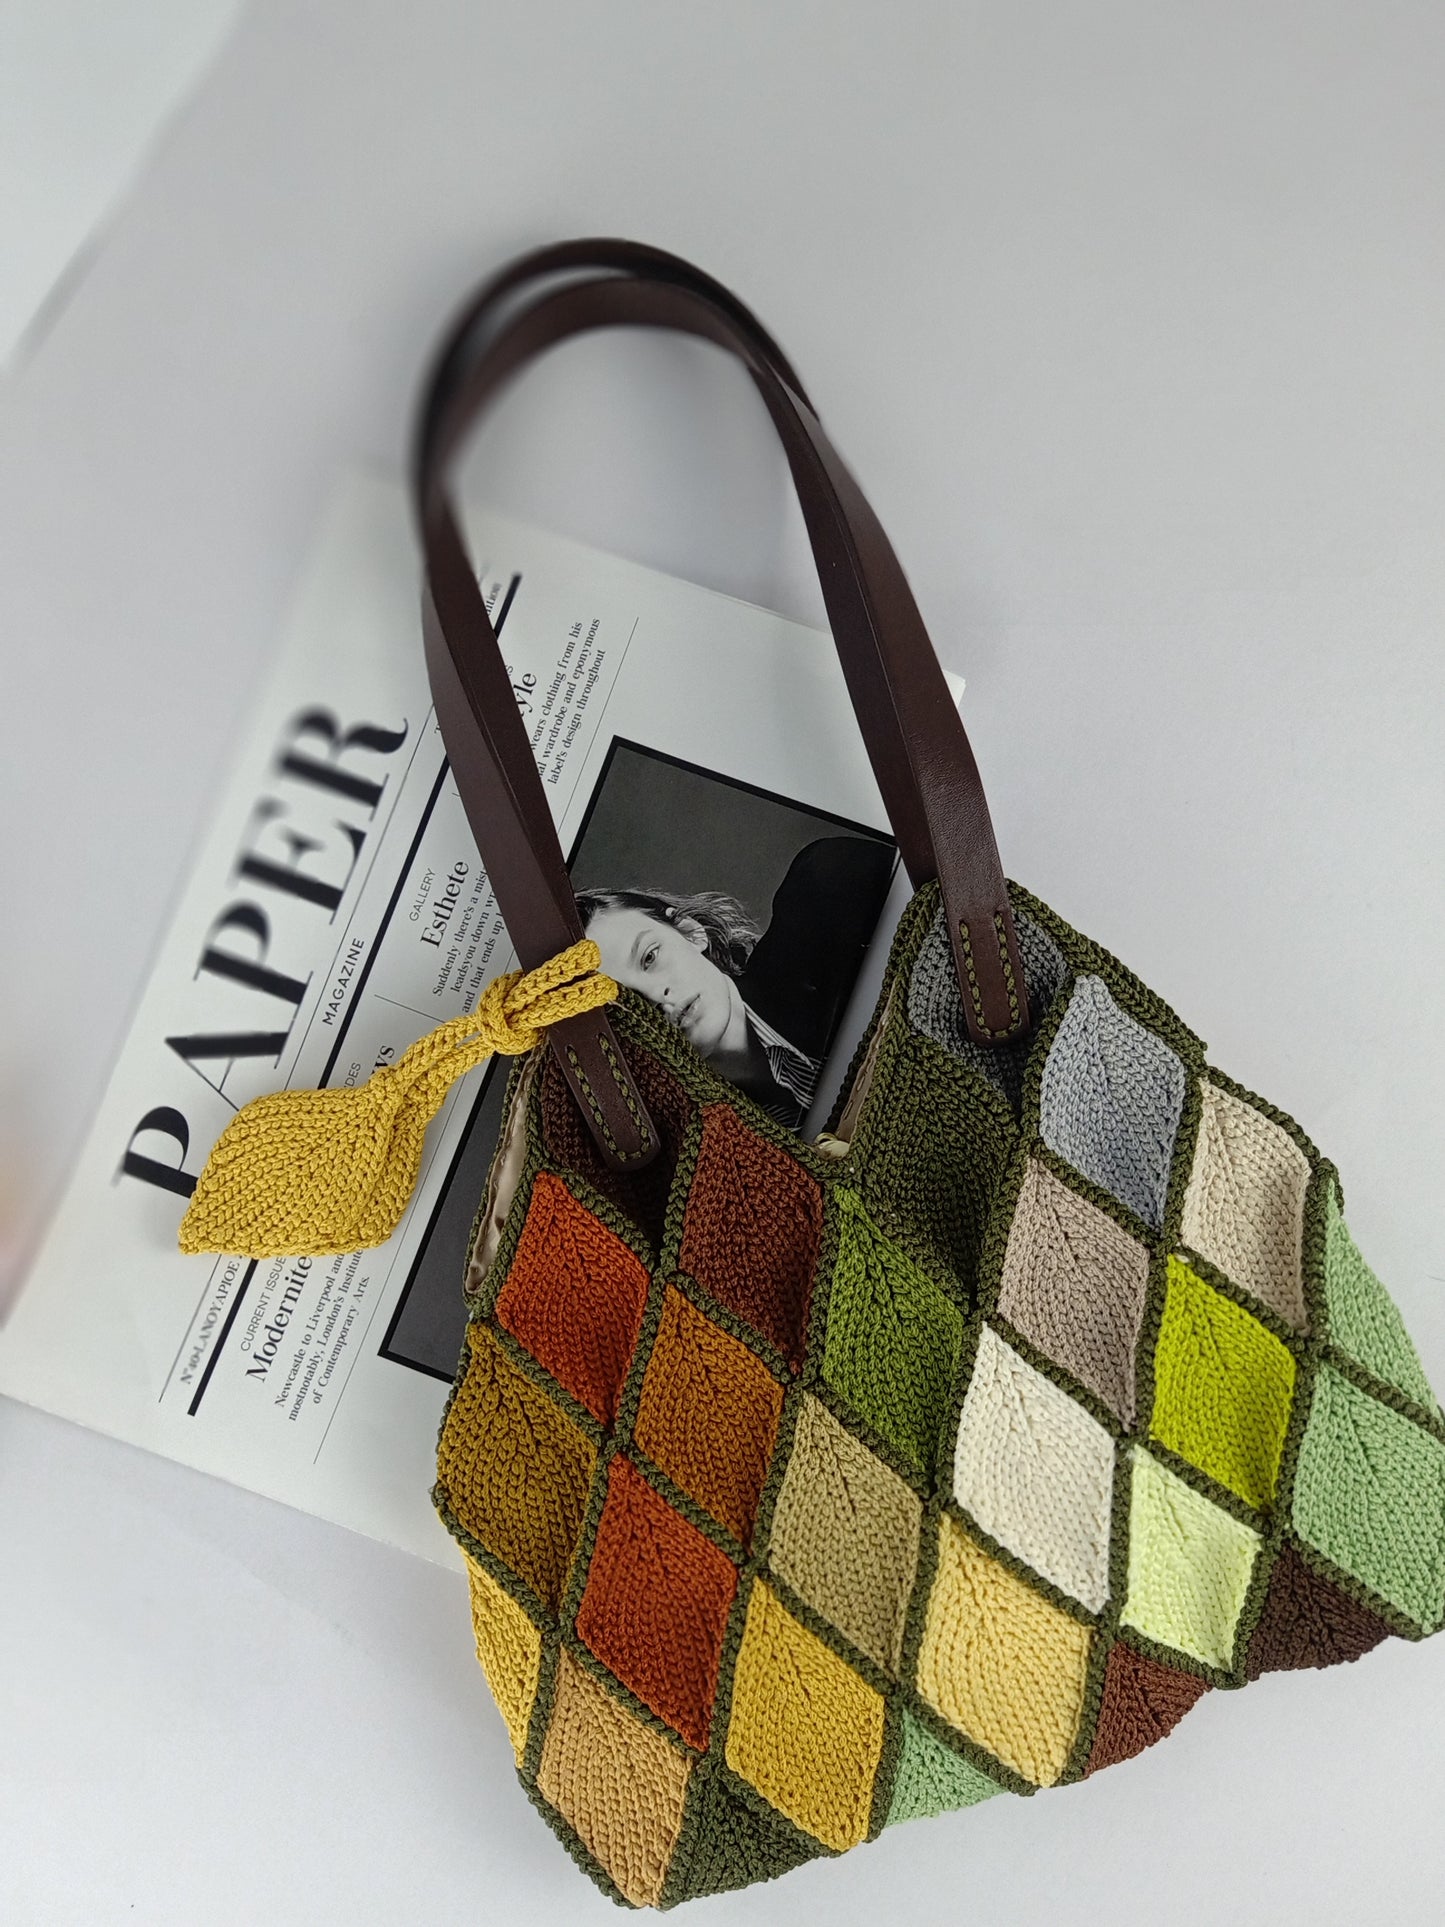 Autumn leaves bag, multicolor crochet bag with leather strap, black friday sale off